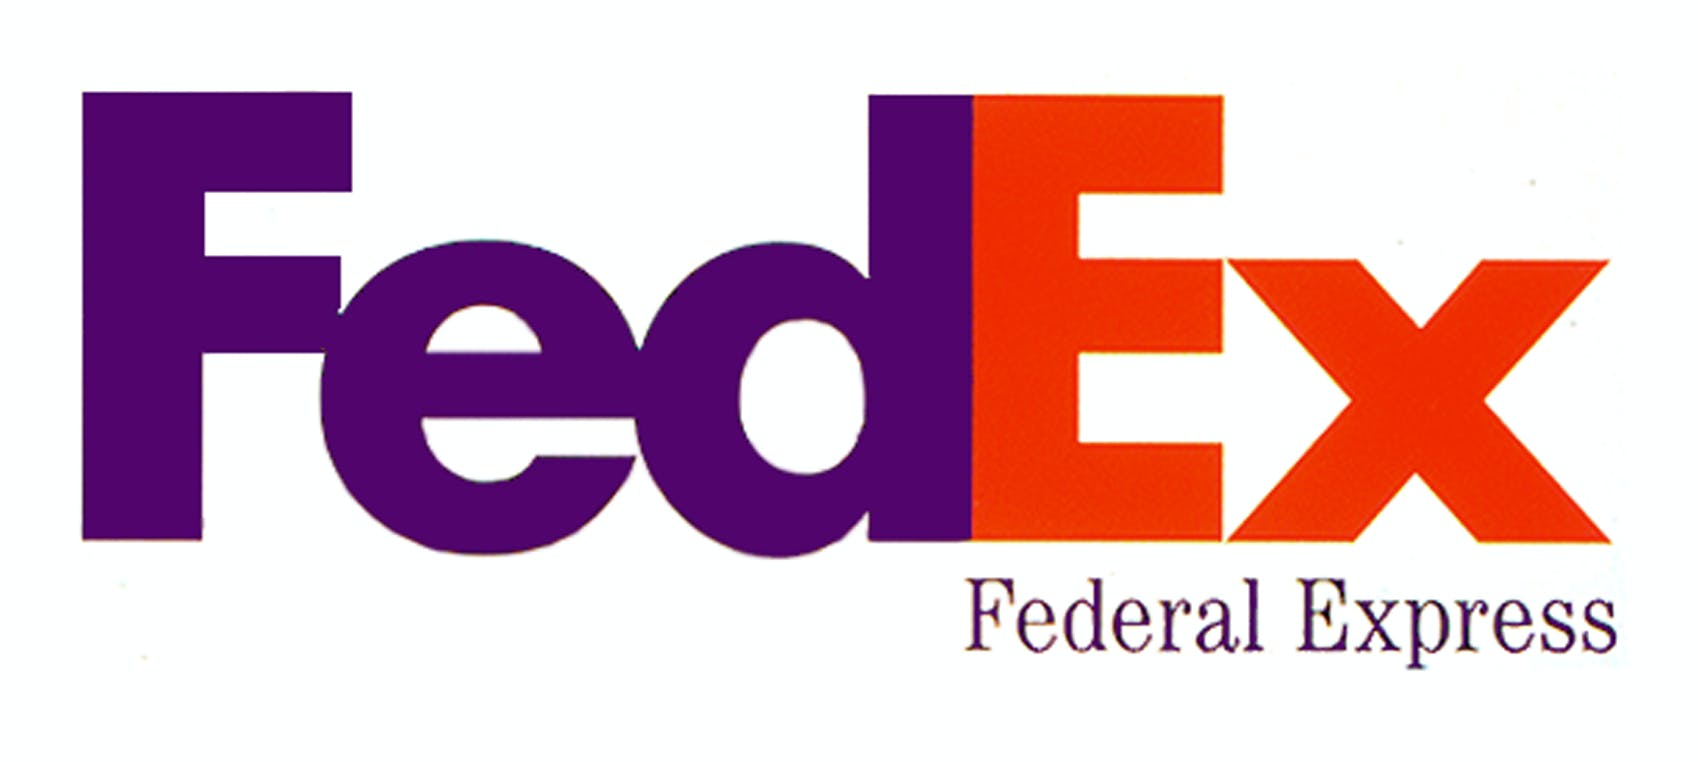 How to Find My FedEx Account Number nigeriantech.com.ng